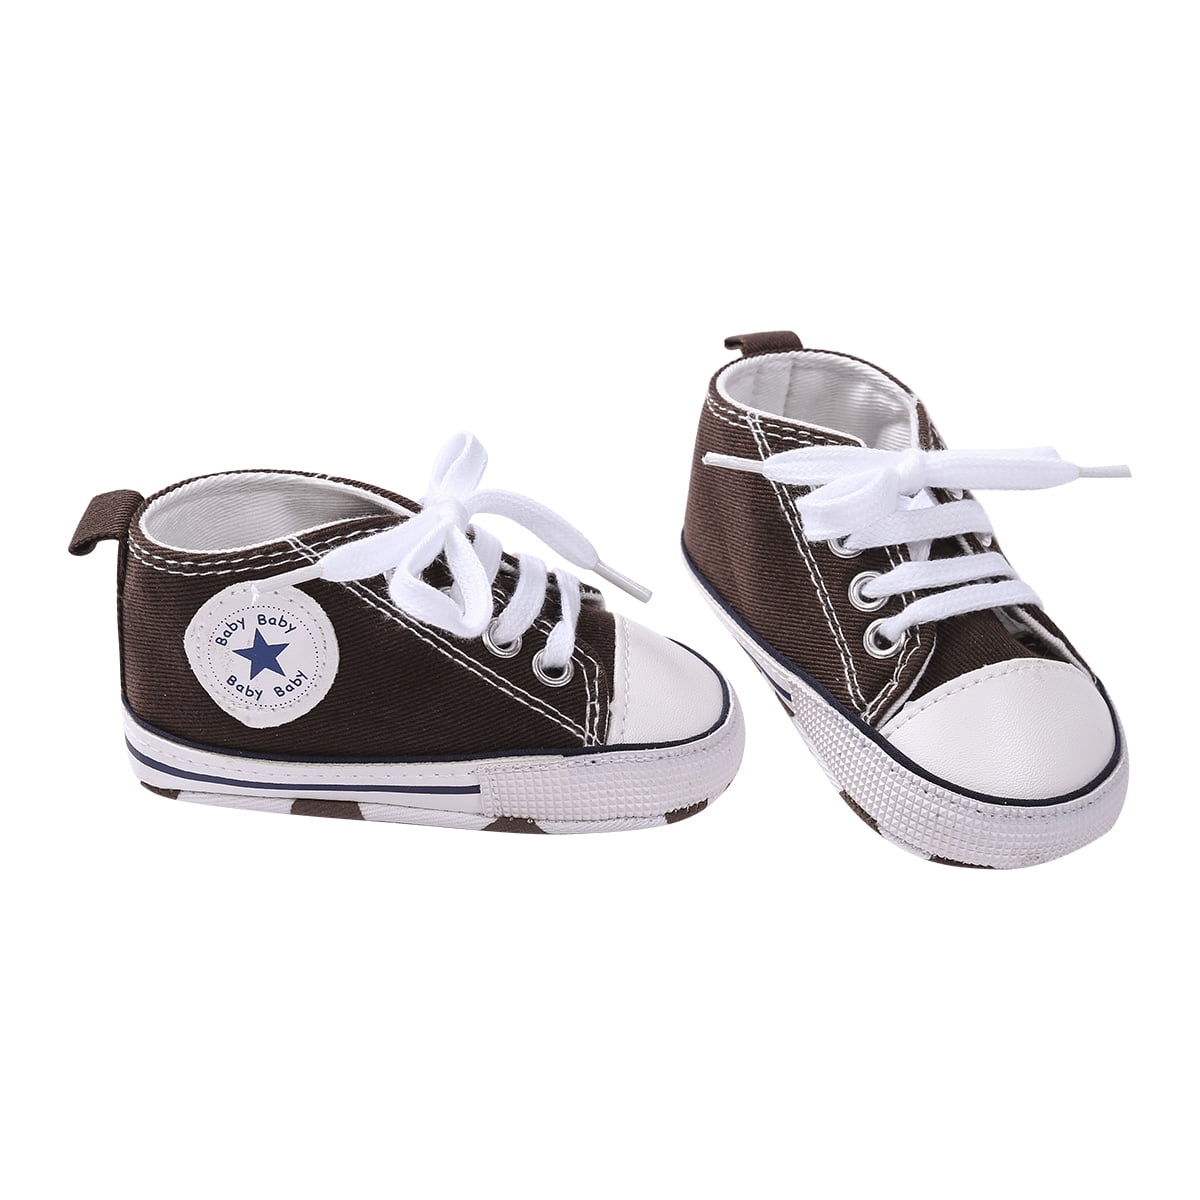 Latest baby/  Kids Canvas Sneakers Baby Boy/Girl Soft Sole,good for pre-walkers. 